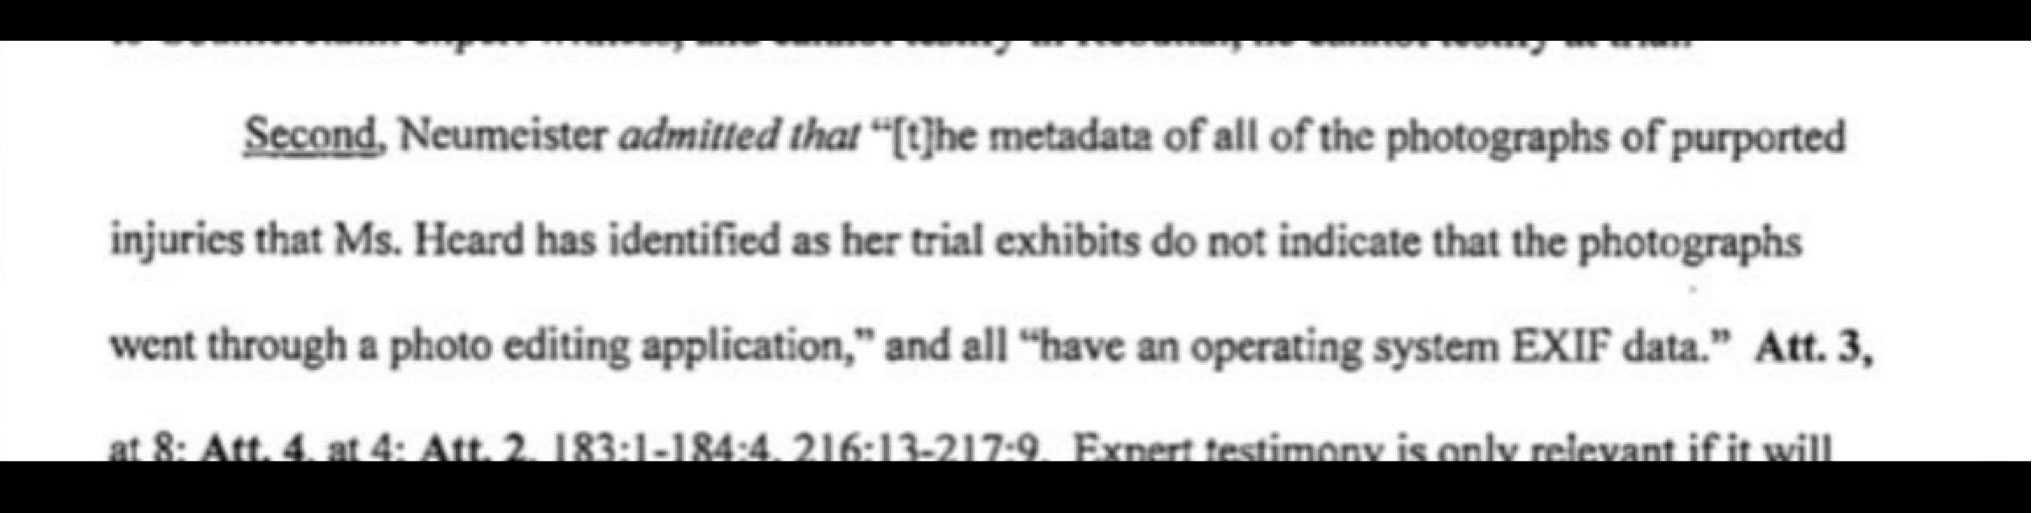 Extract from Unsealed court documents